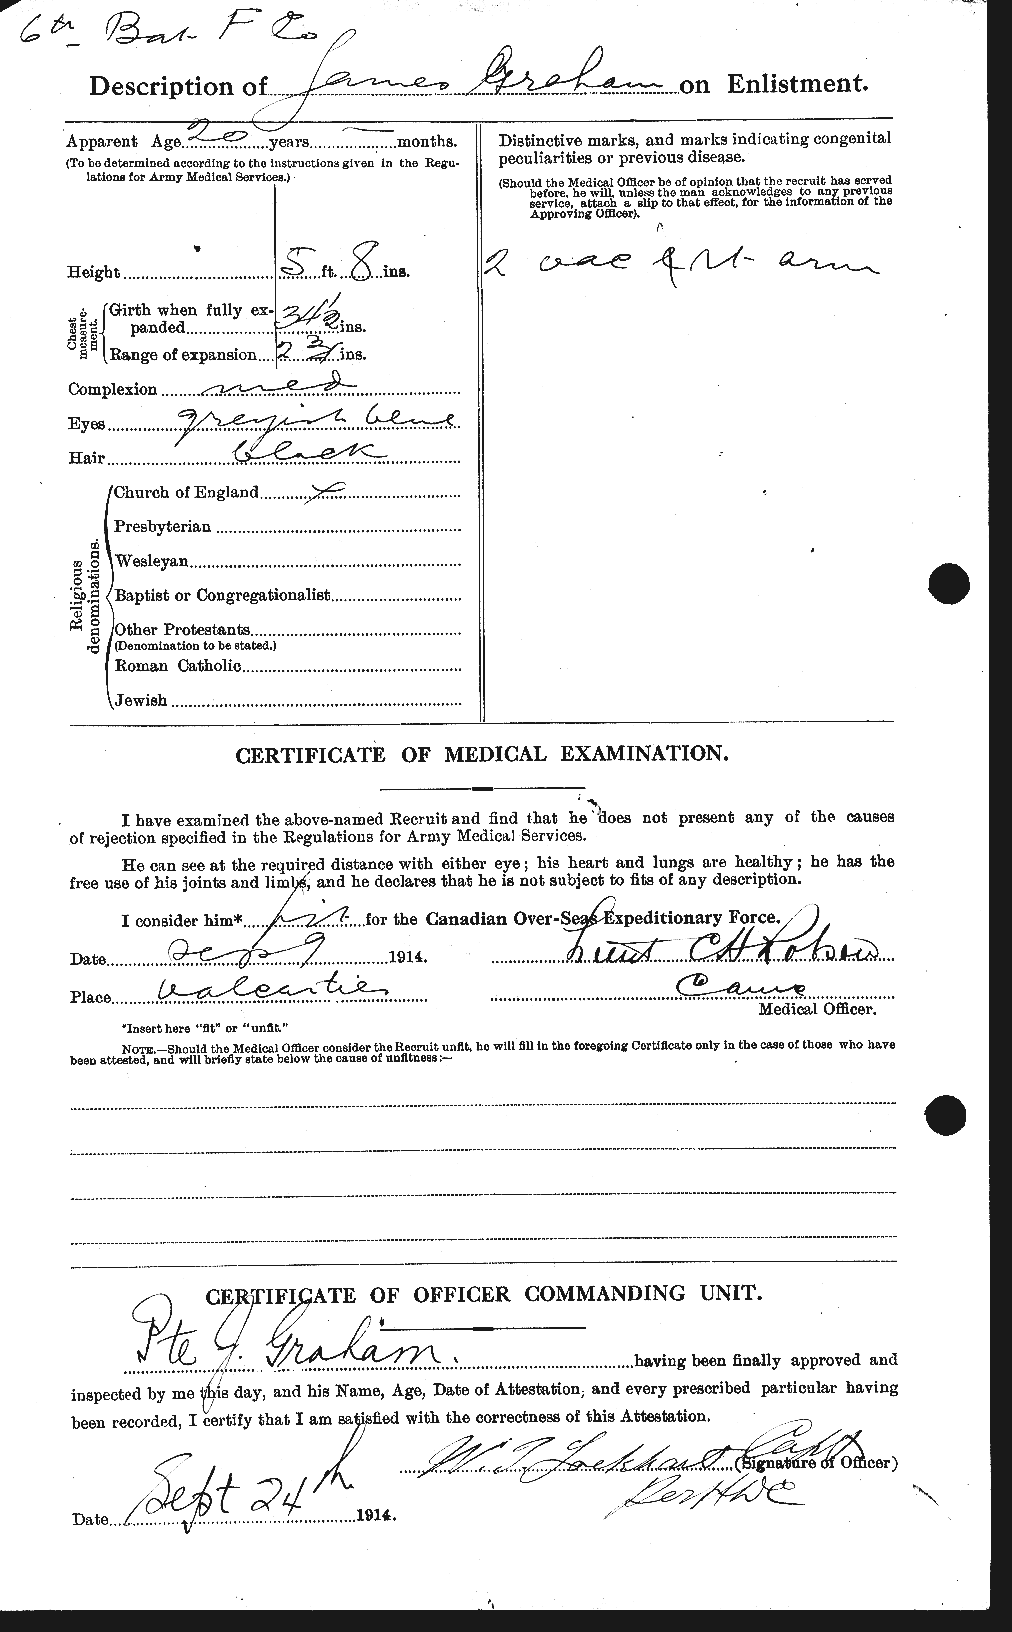 Personnel Records of the First World War - CEF 357789b